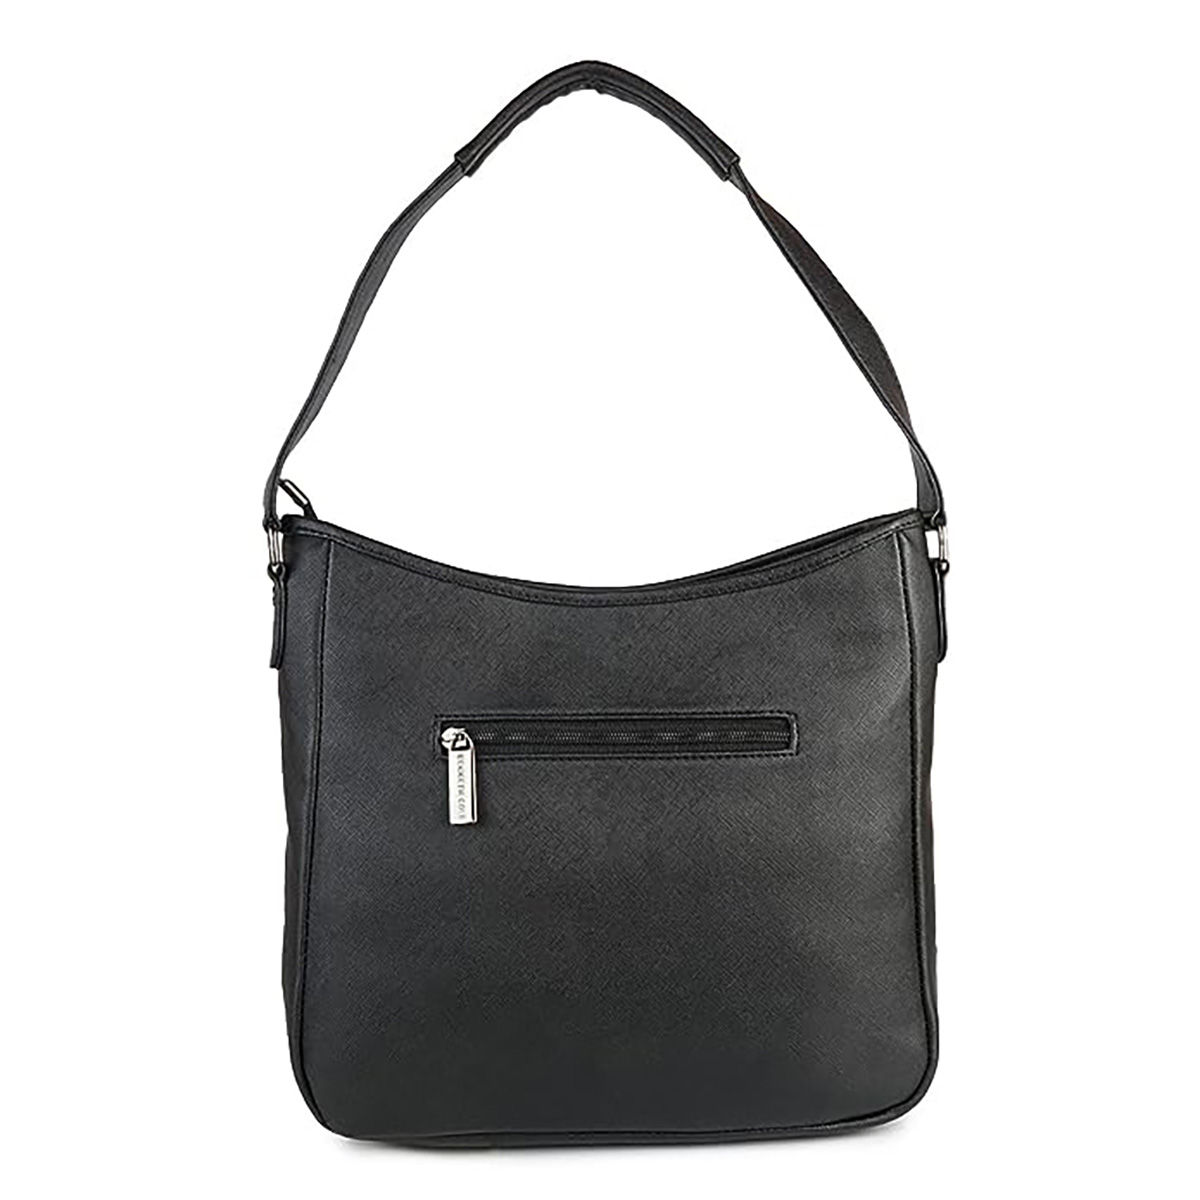 Fwresh Inc - Realer Hobo Bags for Women Leather Purses and